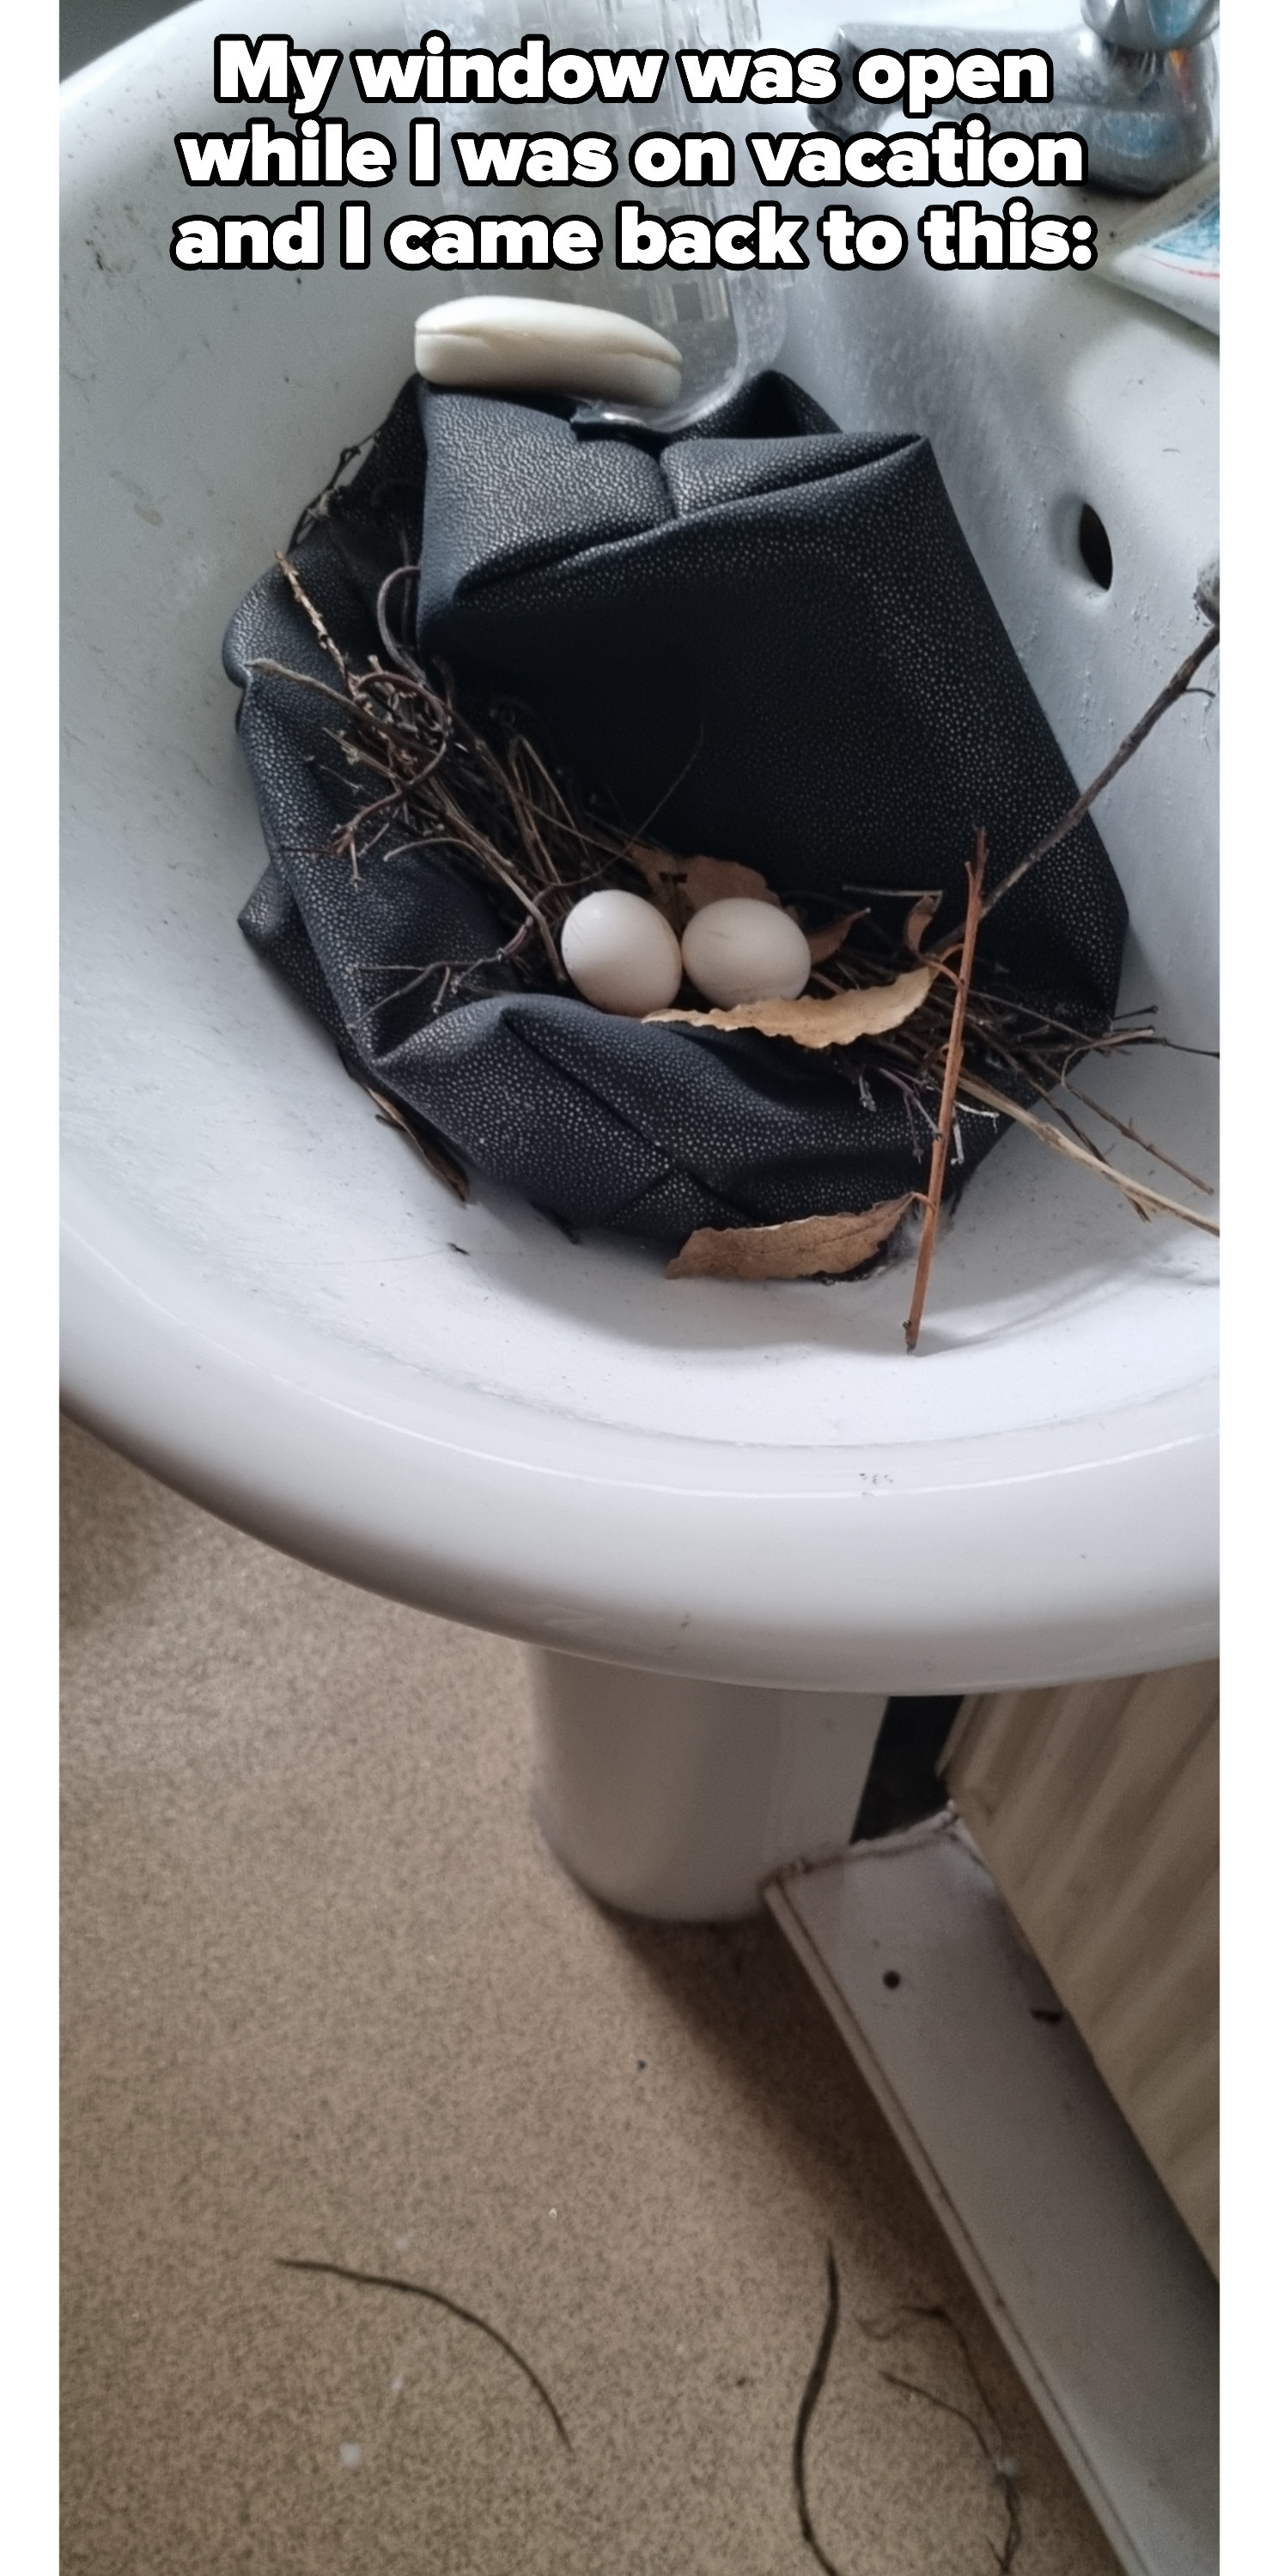 A bird&#x27;s nest and eggs in a bathroom sink